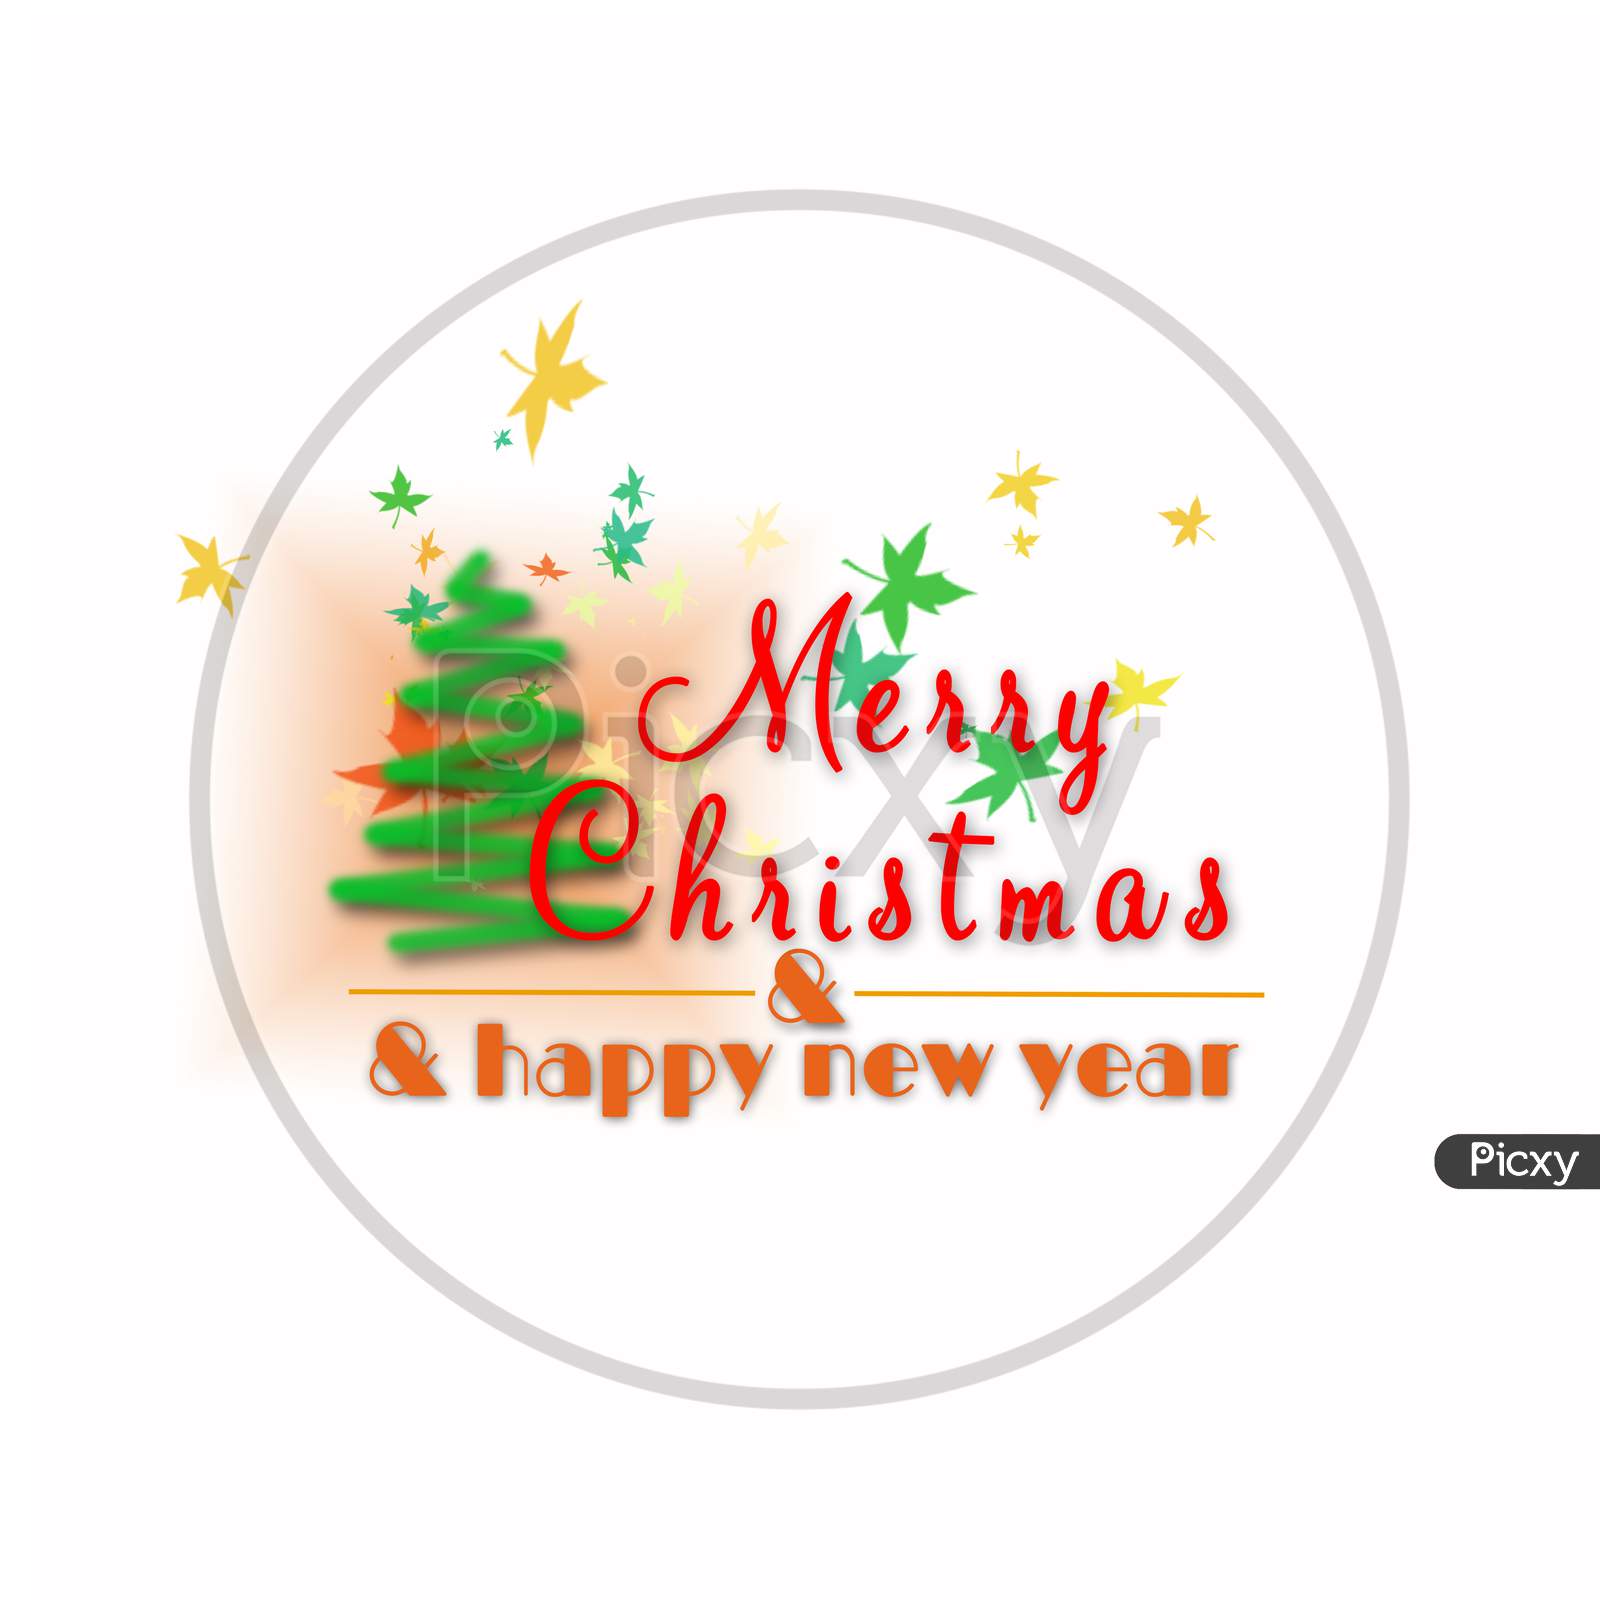 Merry Christmas And Happy New Year Lettering Design Card Template And Creative Typography For Holiday Greeting Gift Poster.